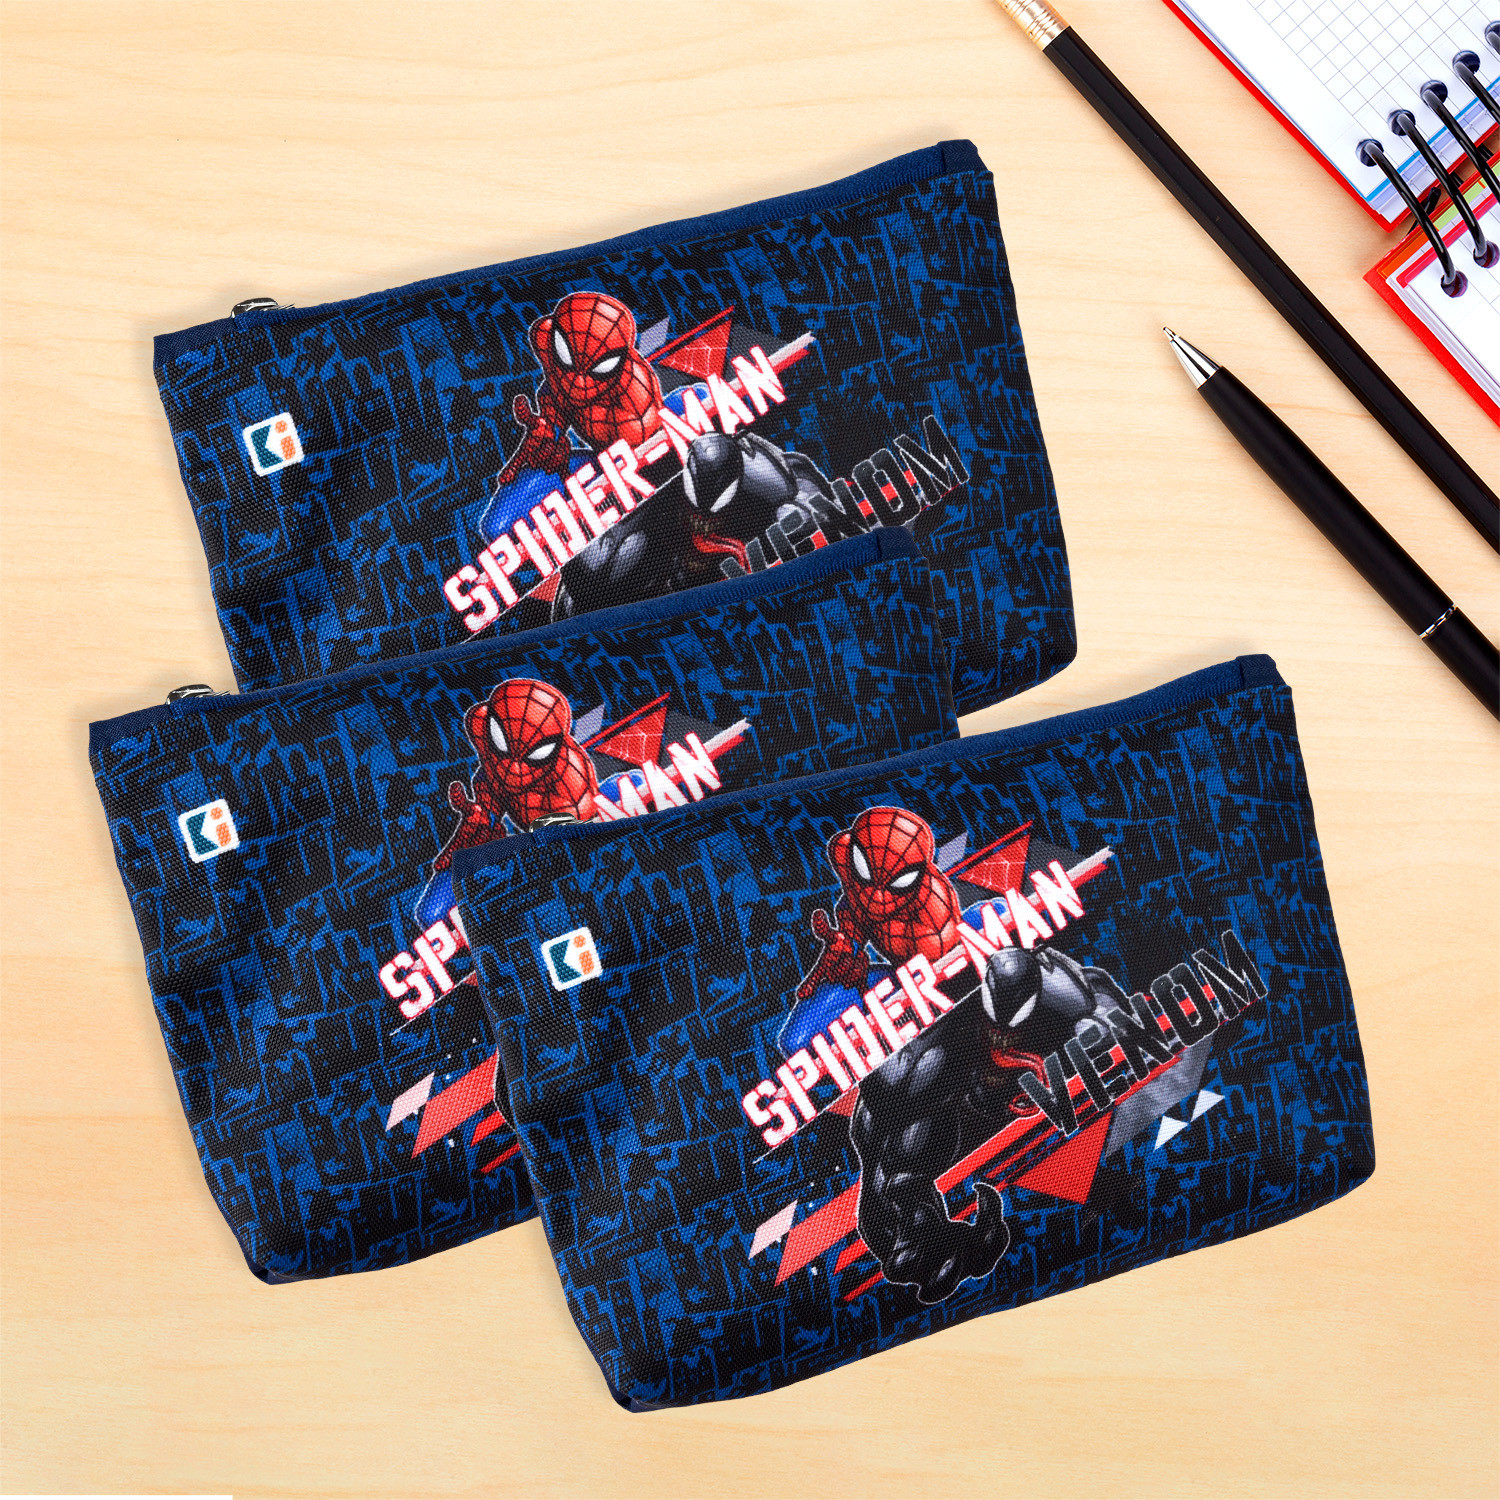 Kuber Industries Pencil Pouch | Square Stationary Pouch | Pen-Pencil Box for Kids | School Geometry Pouch | Pencil Utility Bag | Zipper Pencil Organizer | Marvel Spider-Man | Navy Blue